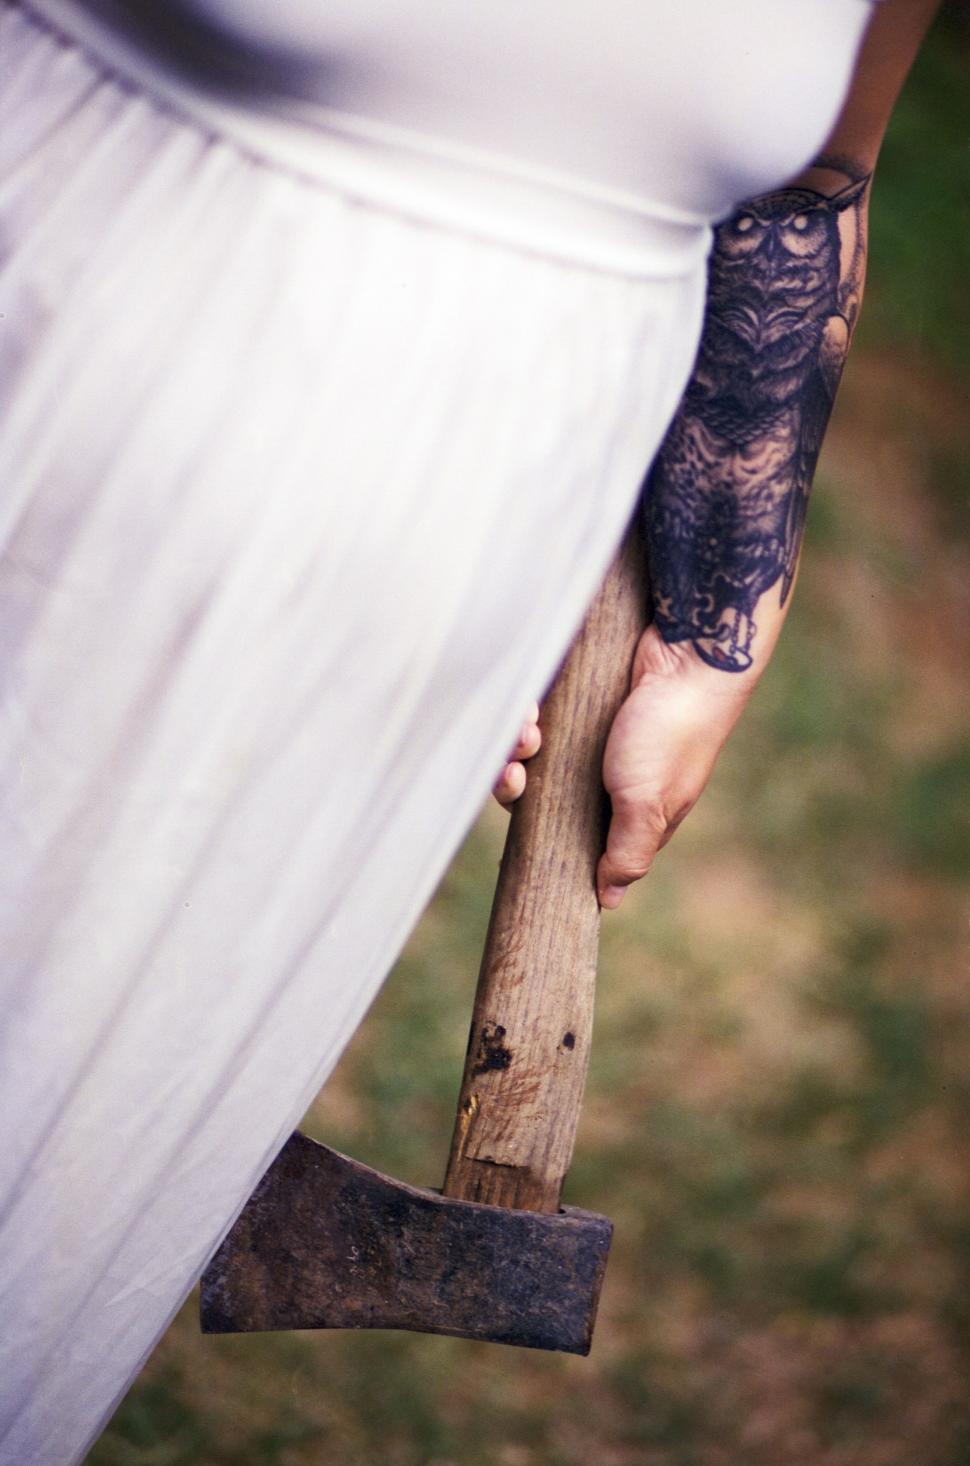 Free Image of Woman in White Dress Holding Large Axe 